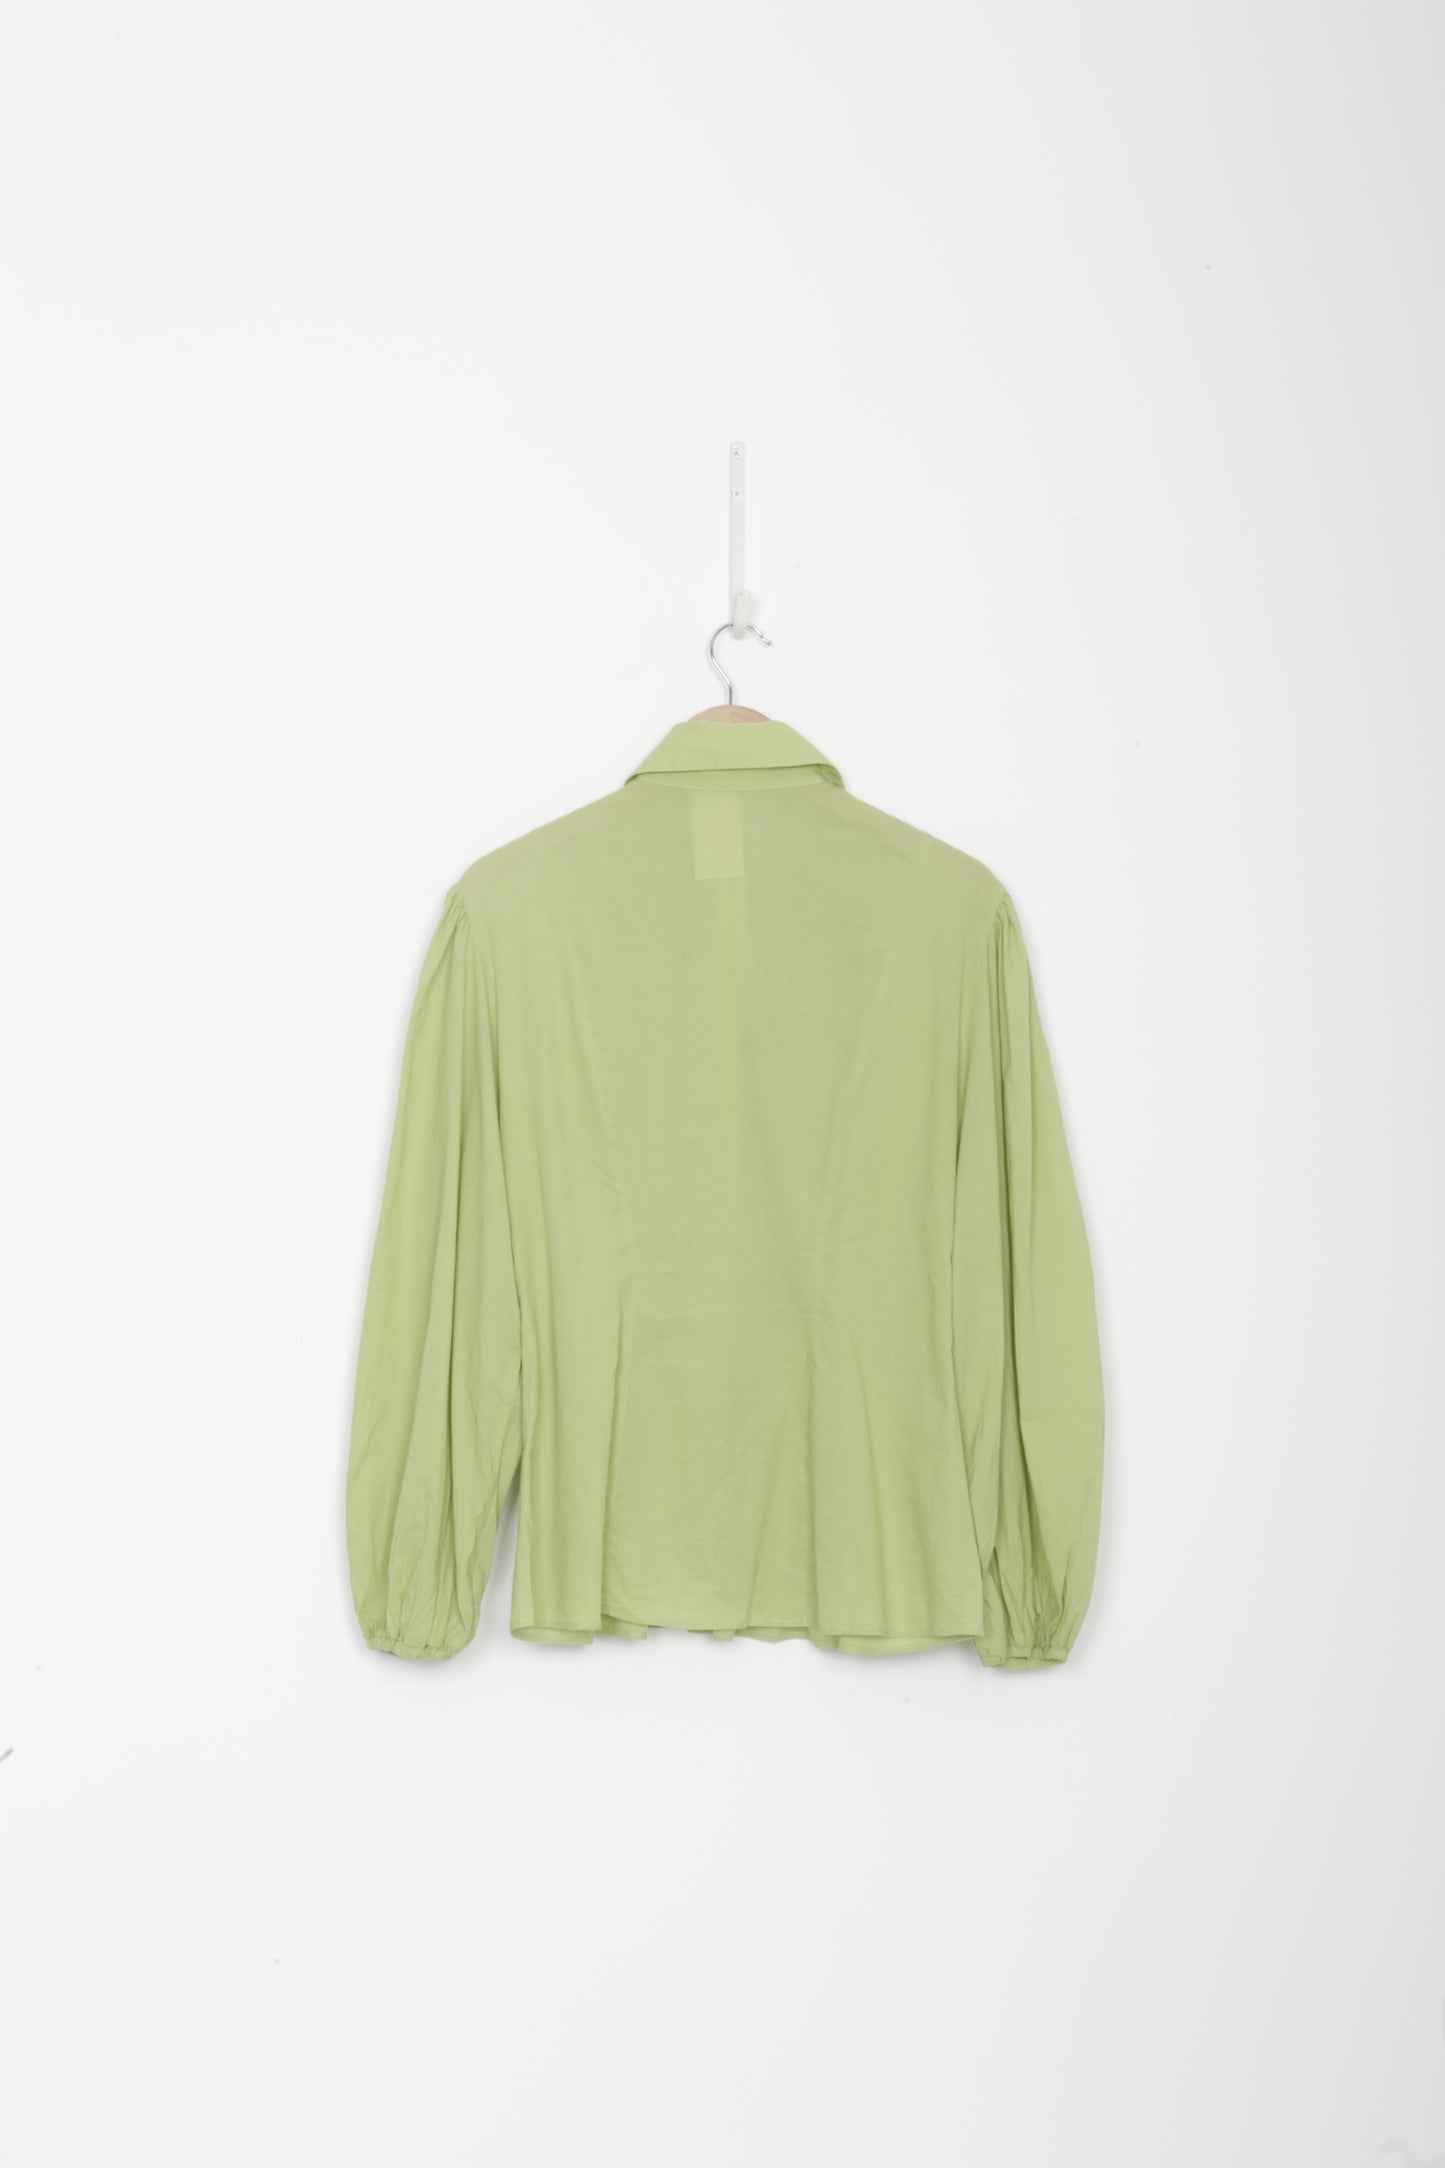 Maggie Marilyn Womens Green Blouse Size 12